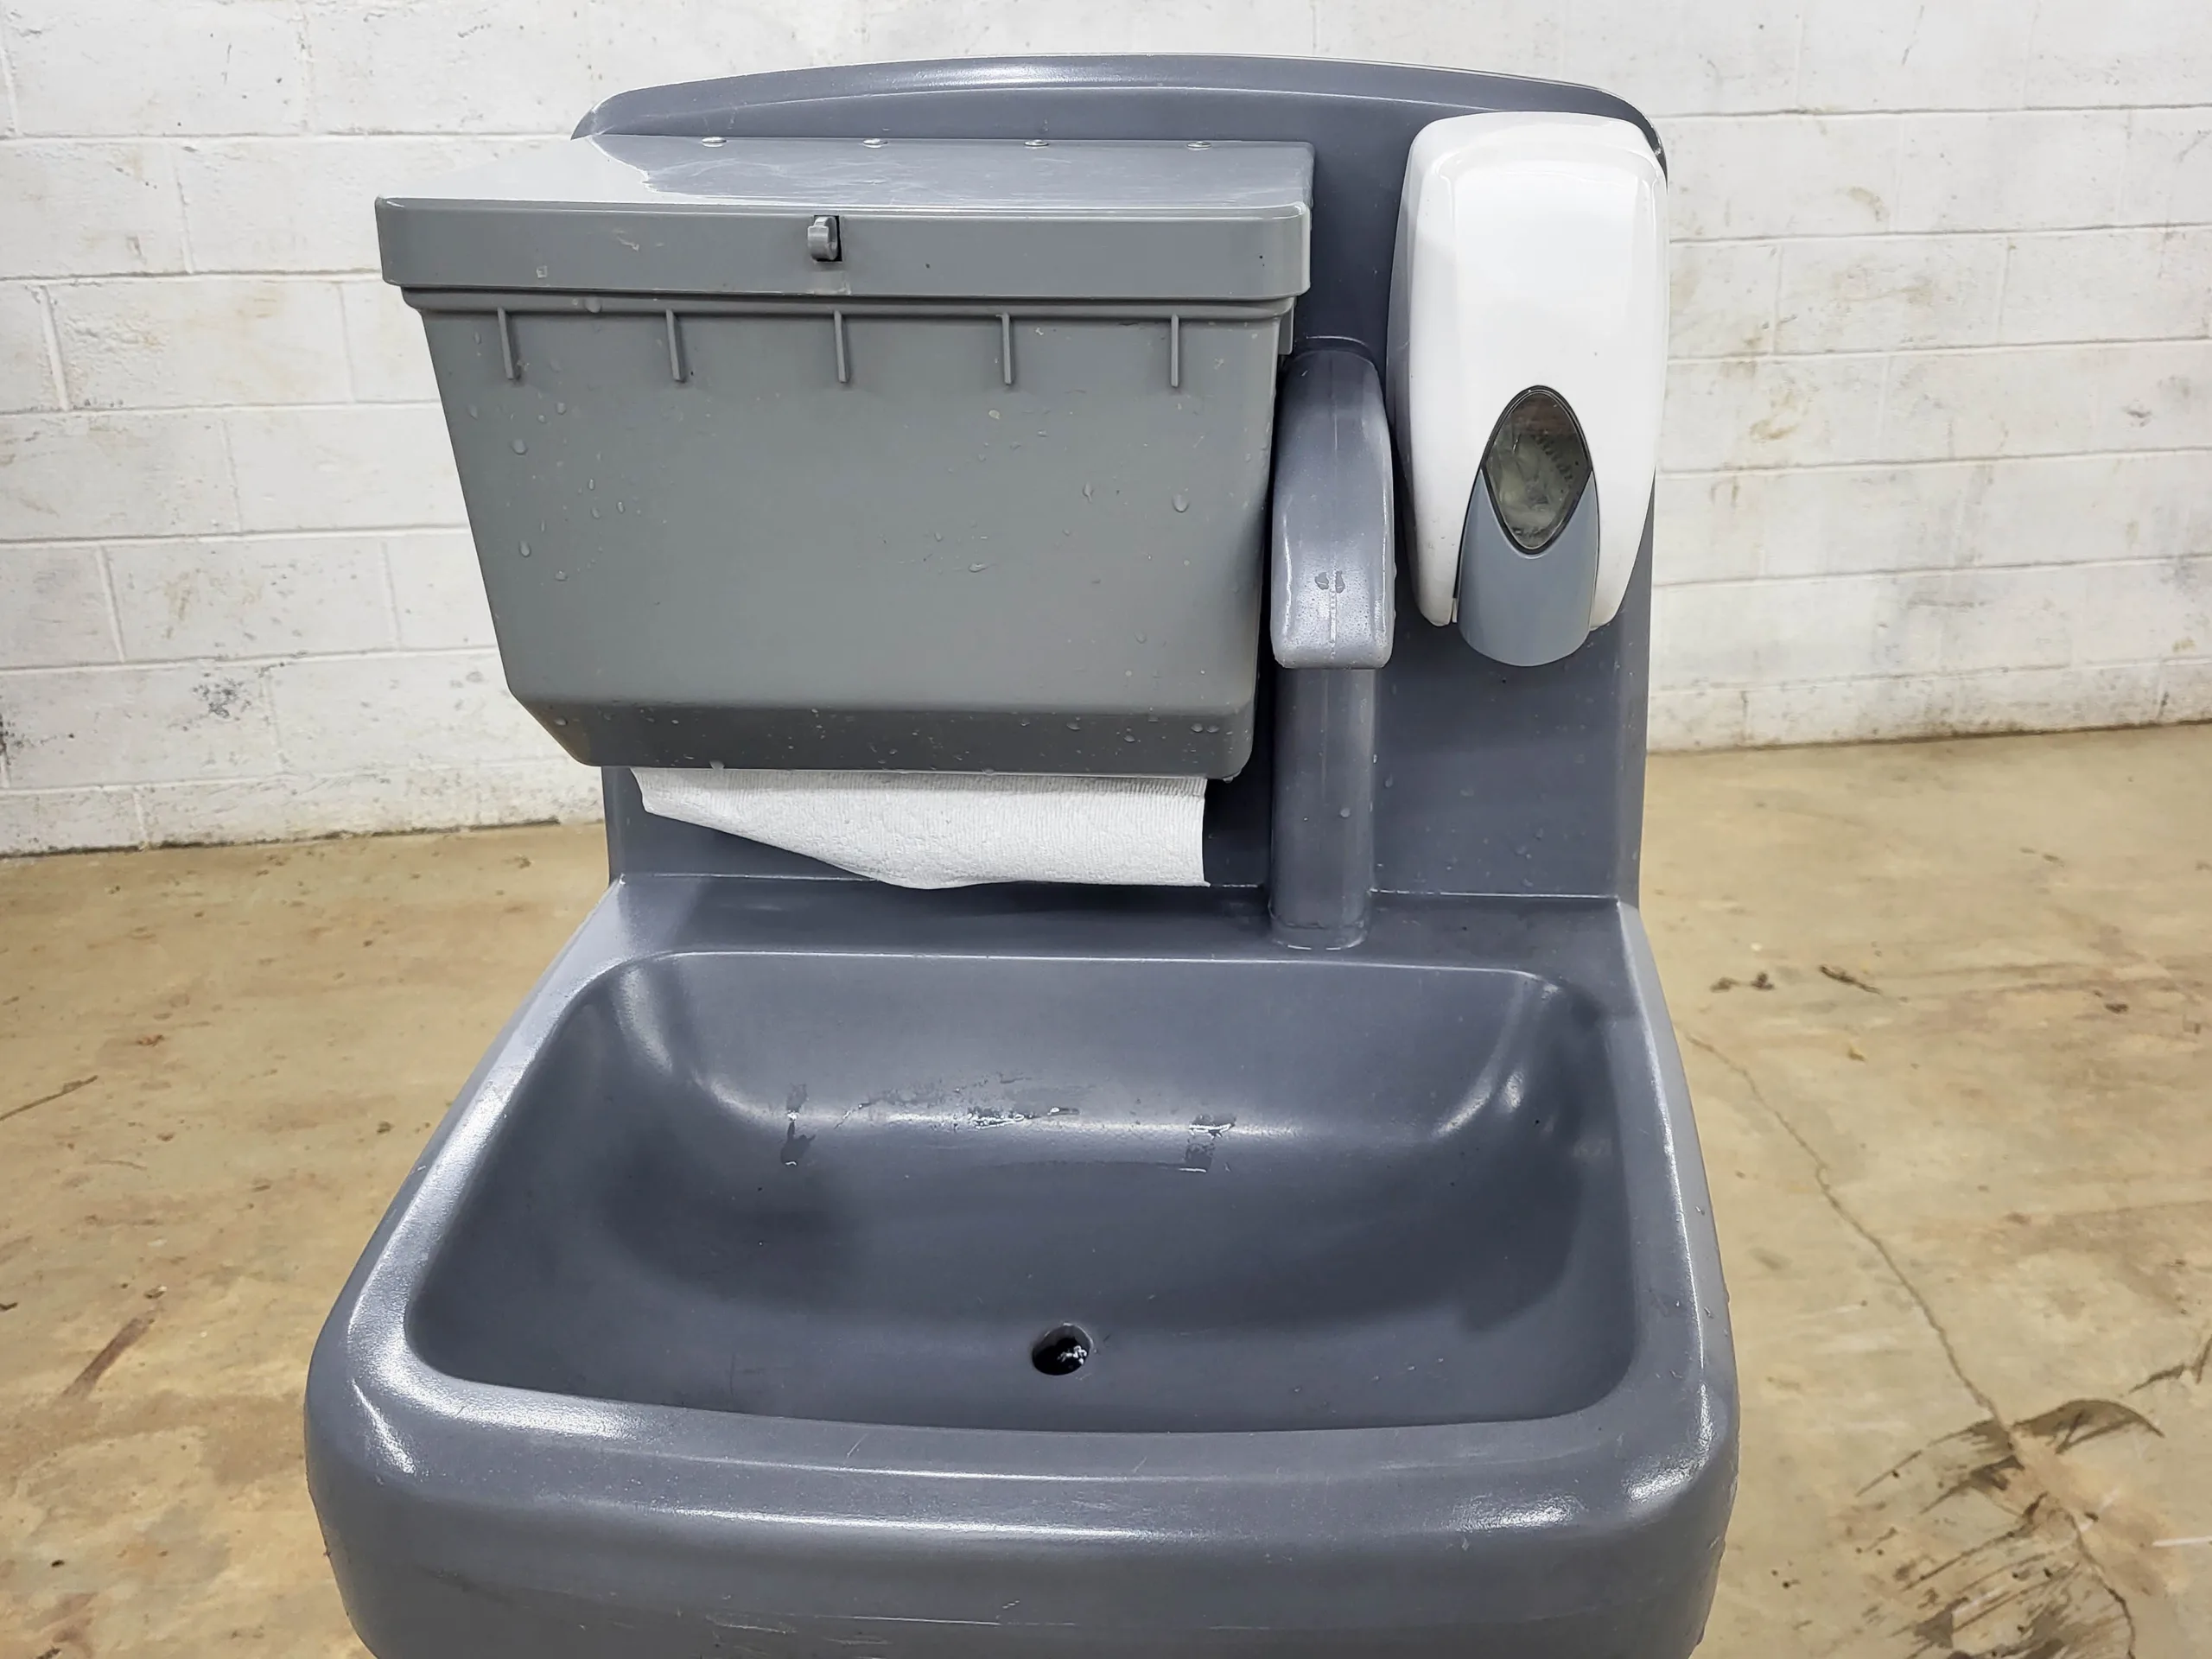 Portable outdoor hand washing station 